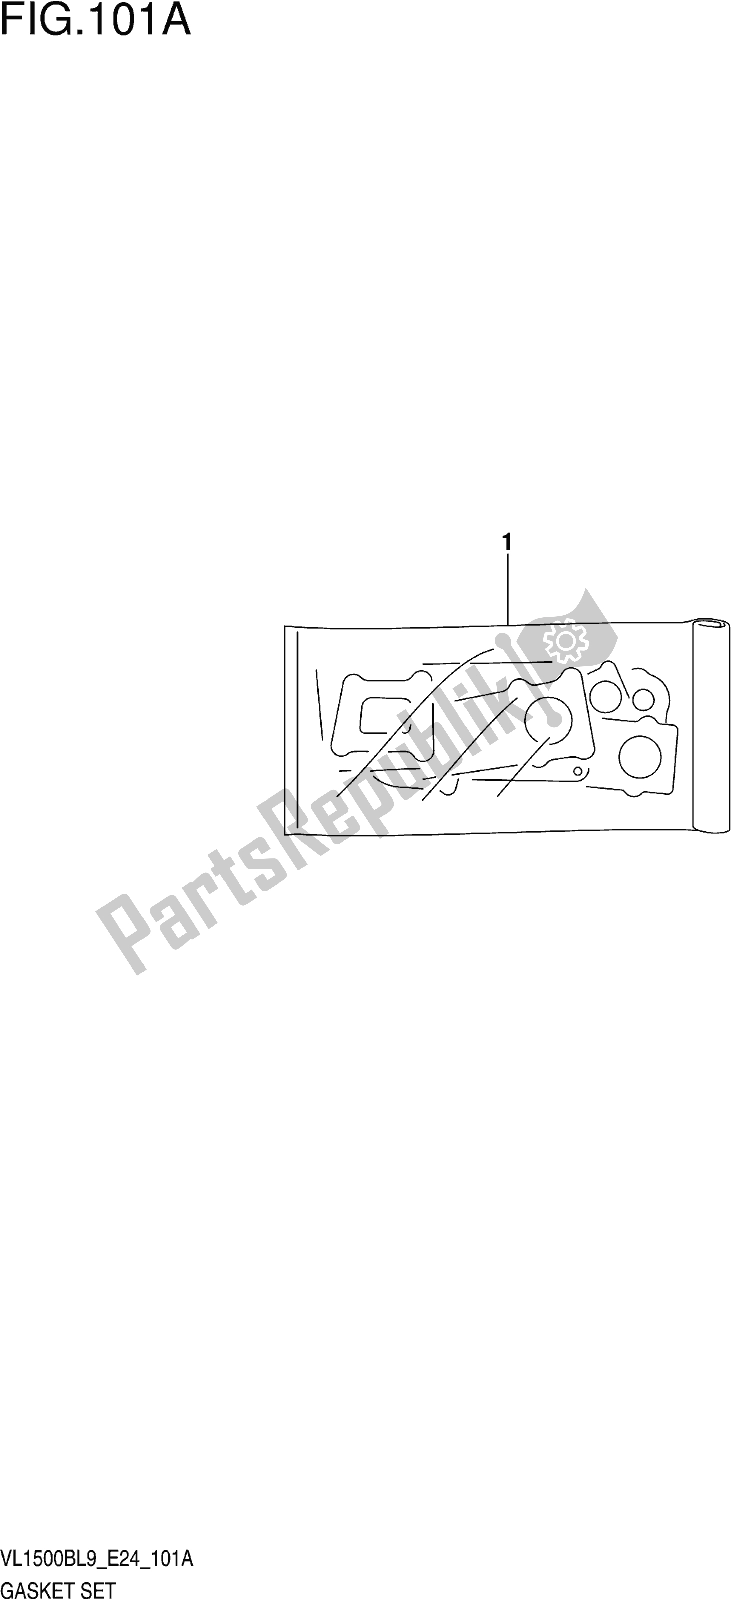 All parts for the Fig. 101a Gasket Set of the Suzuki VL 1500B 2019